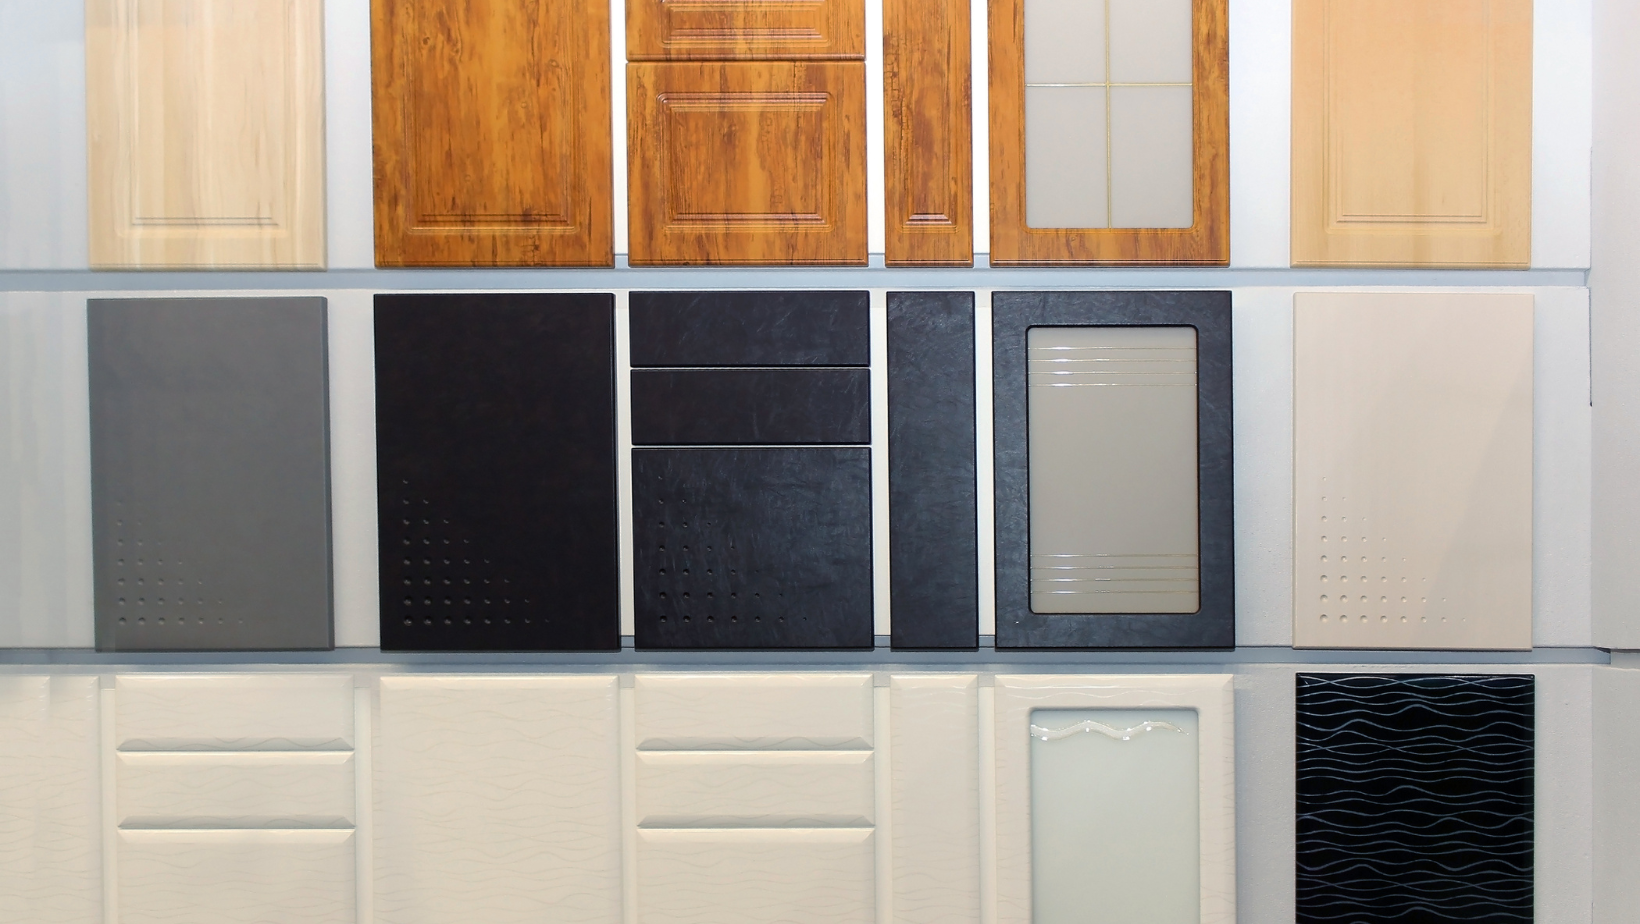 An array of various kitchen cabinet styles such as raised panel, flat panel, shaker and glass front